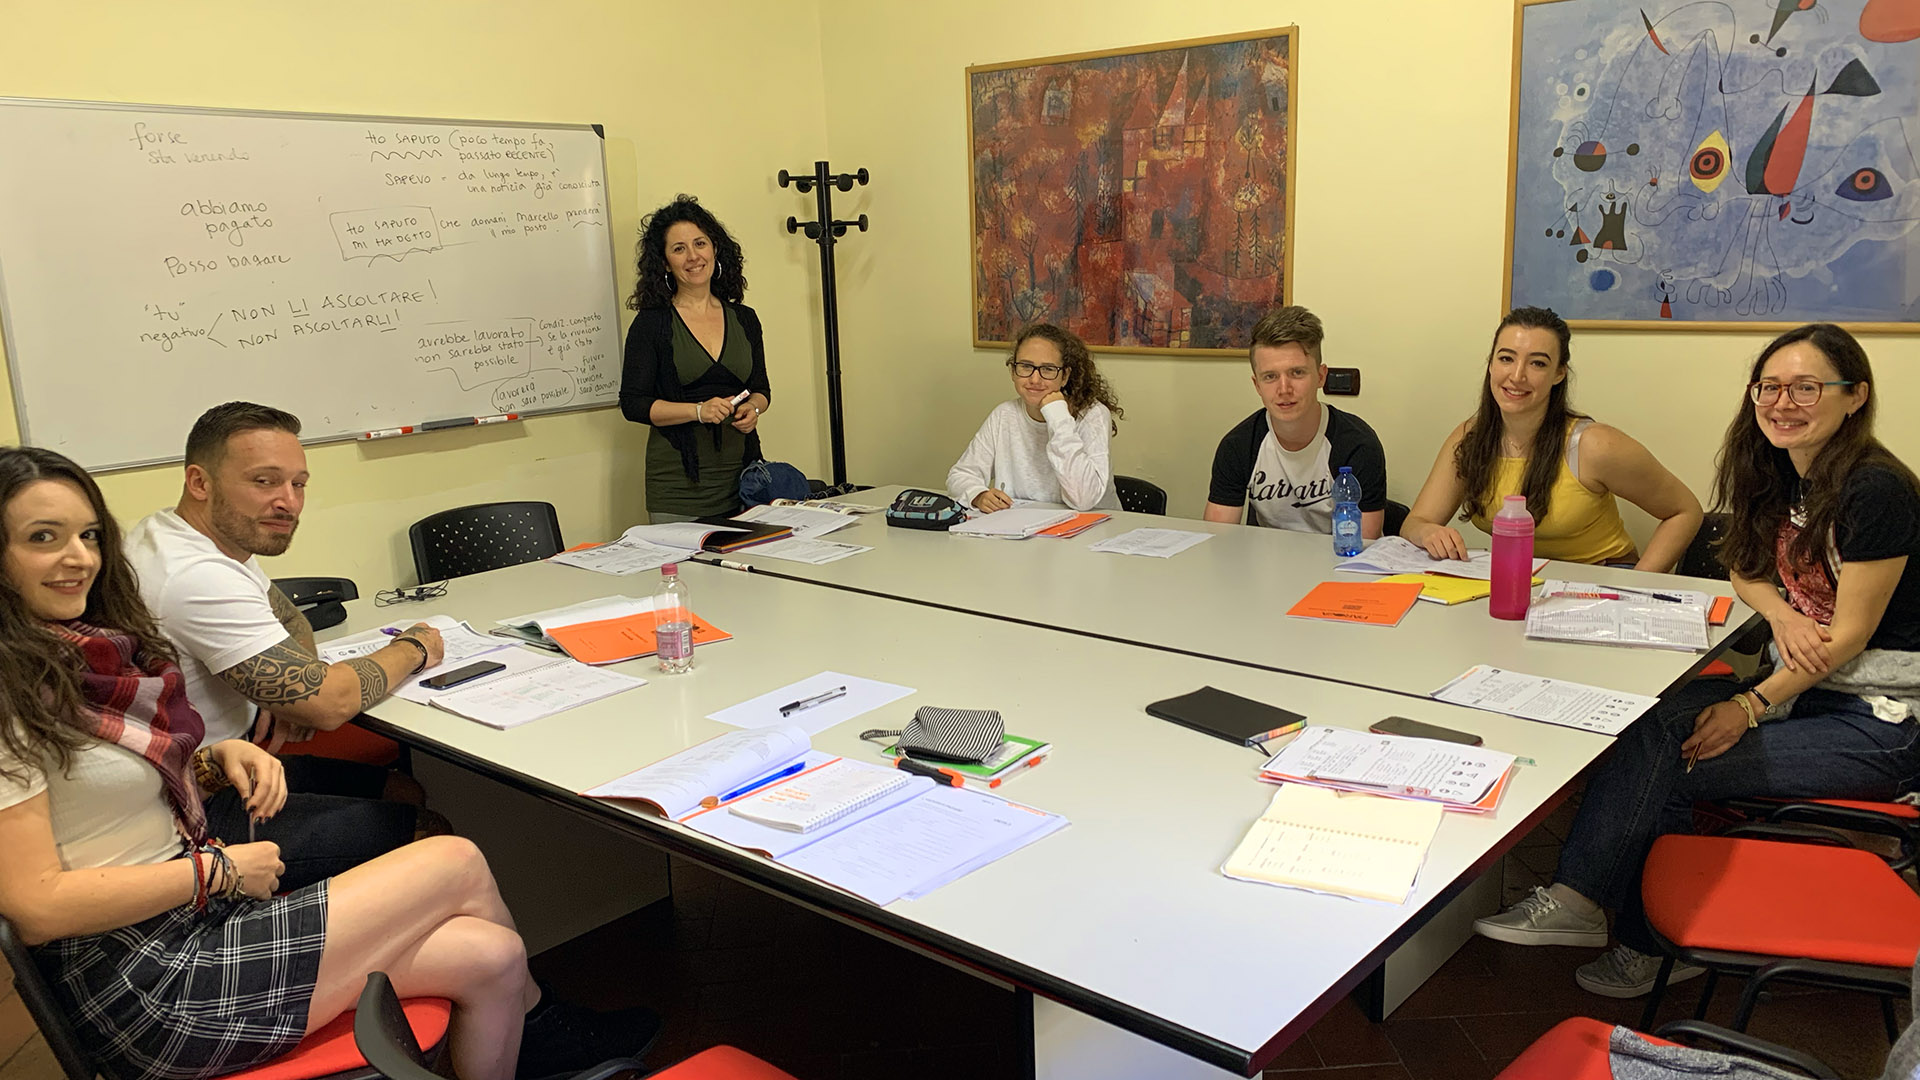 Group Italian language course in Florence